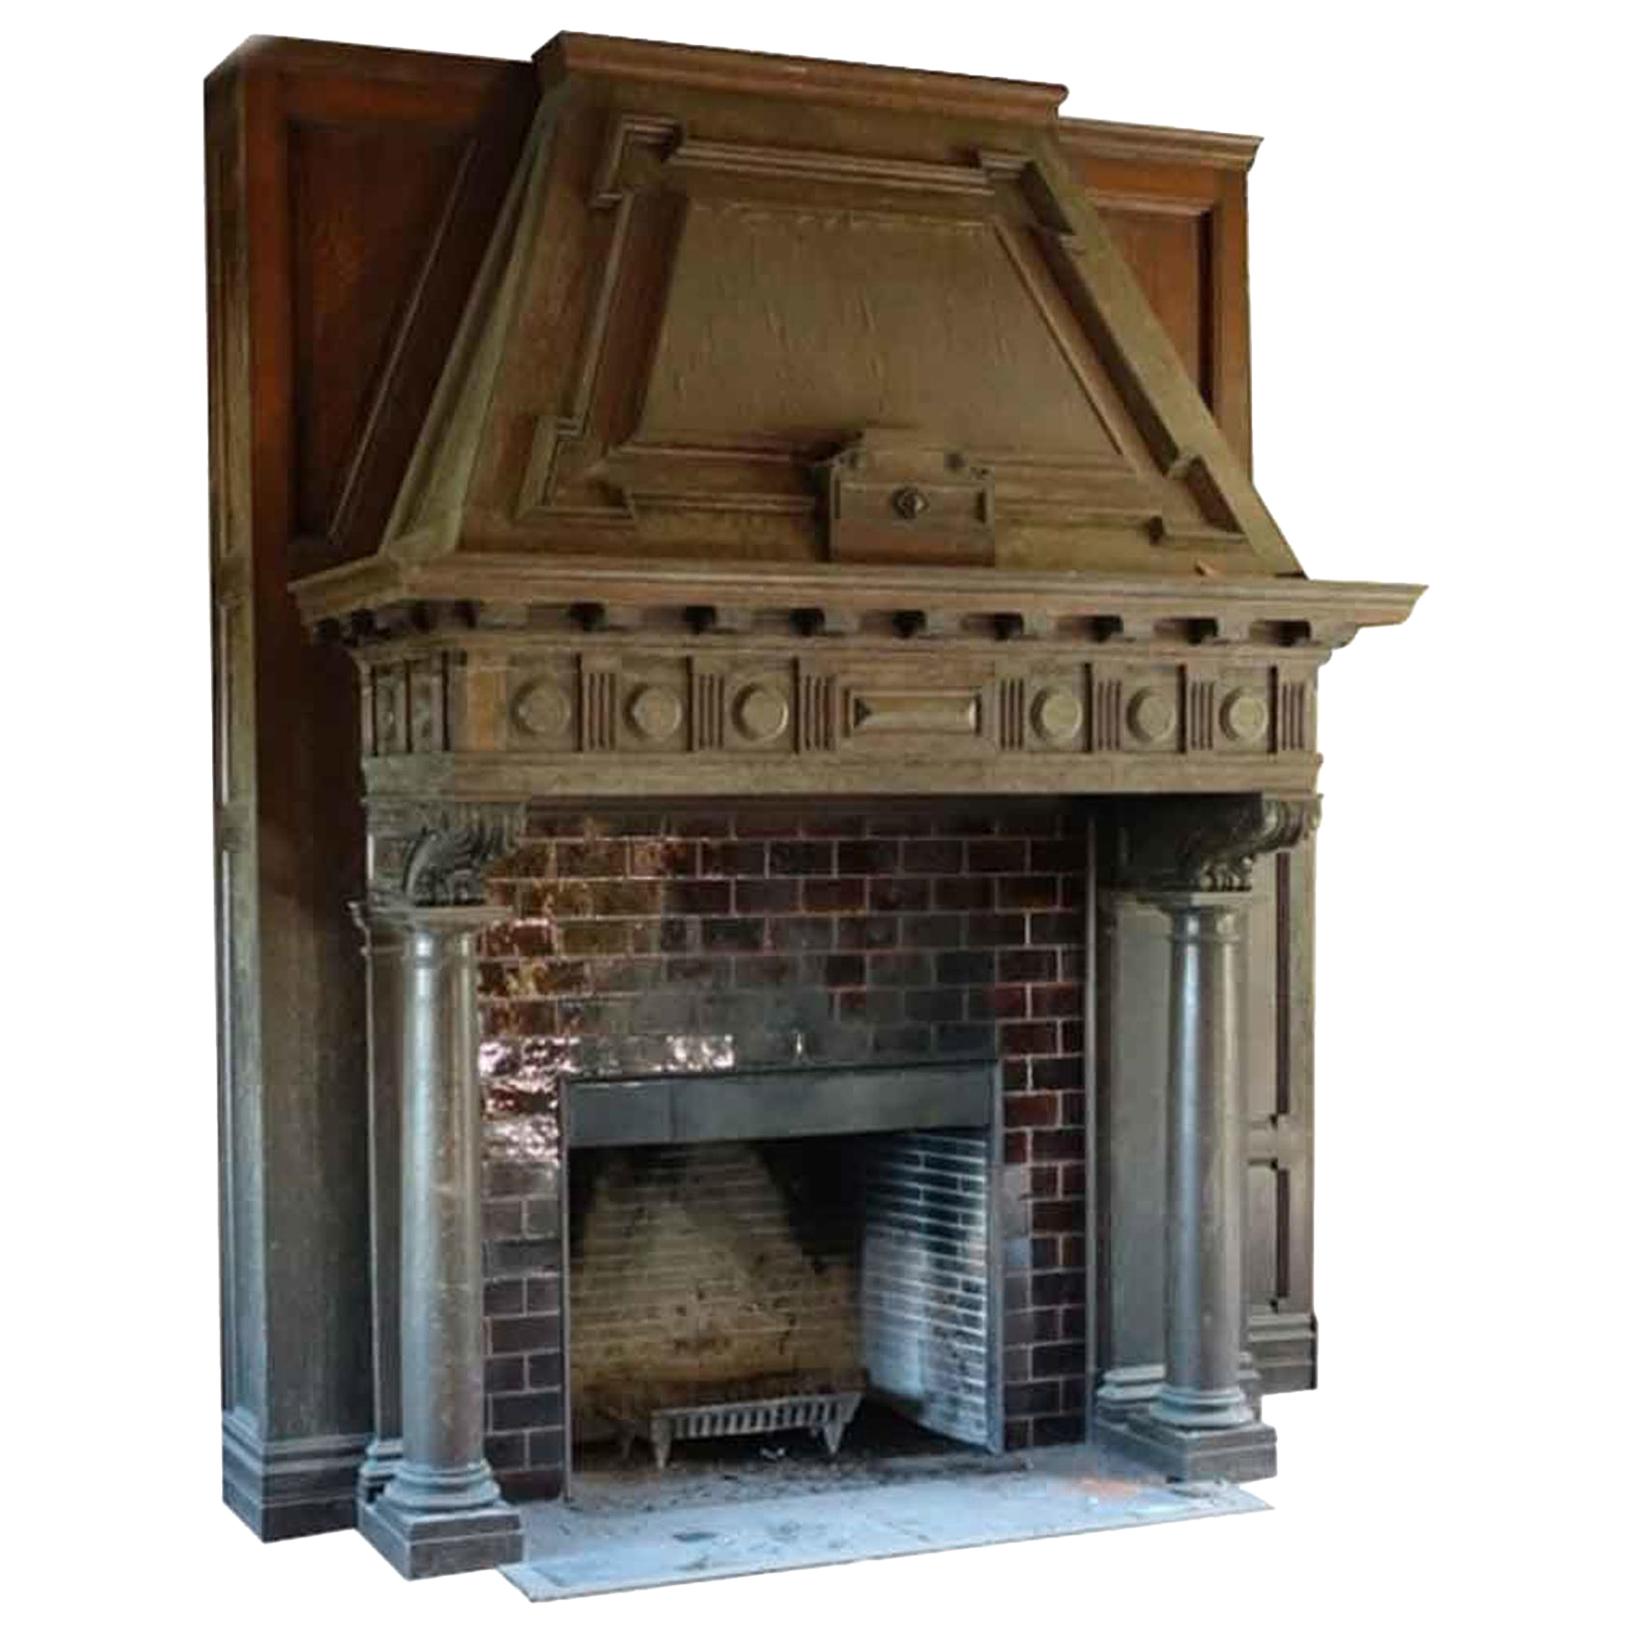 1904 Hand Carved Tudor Wood Mantel from The Rose Hill Mansion, Mount Kisco, NY